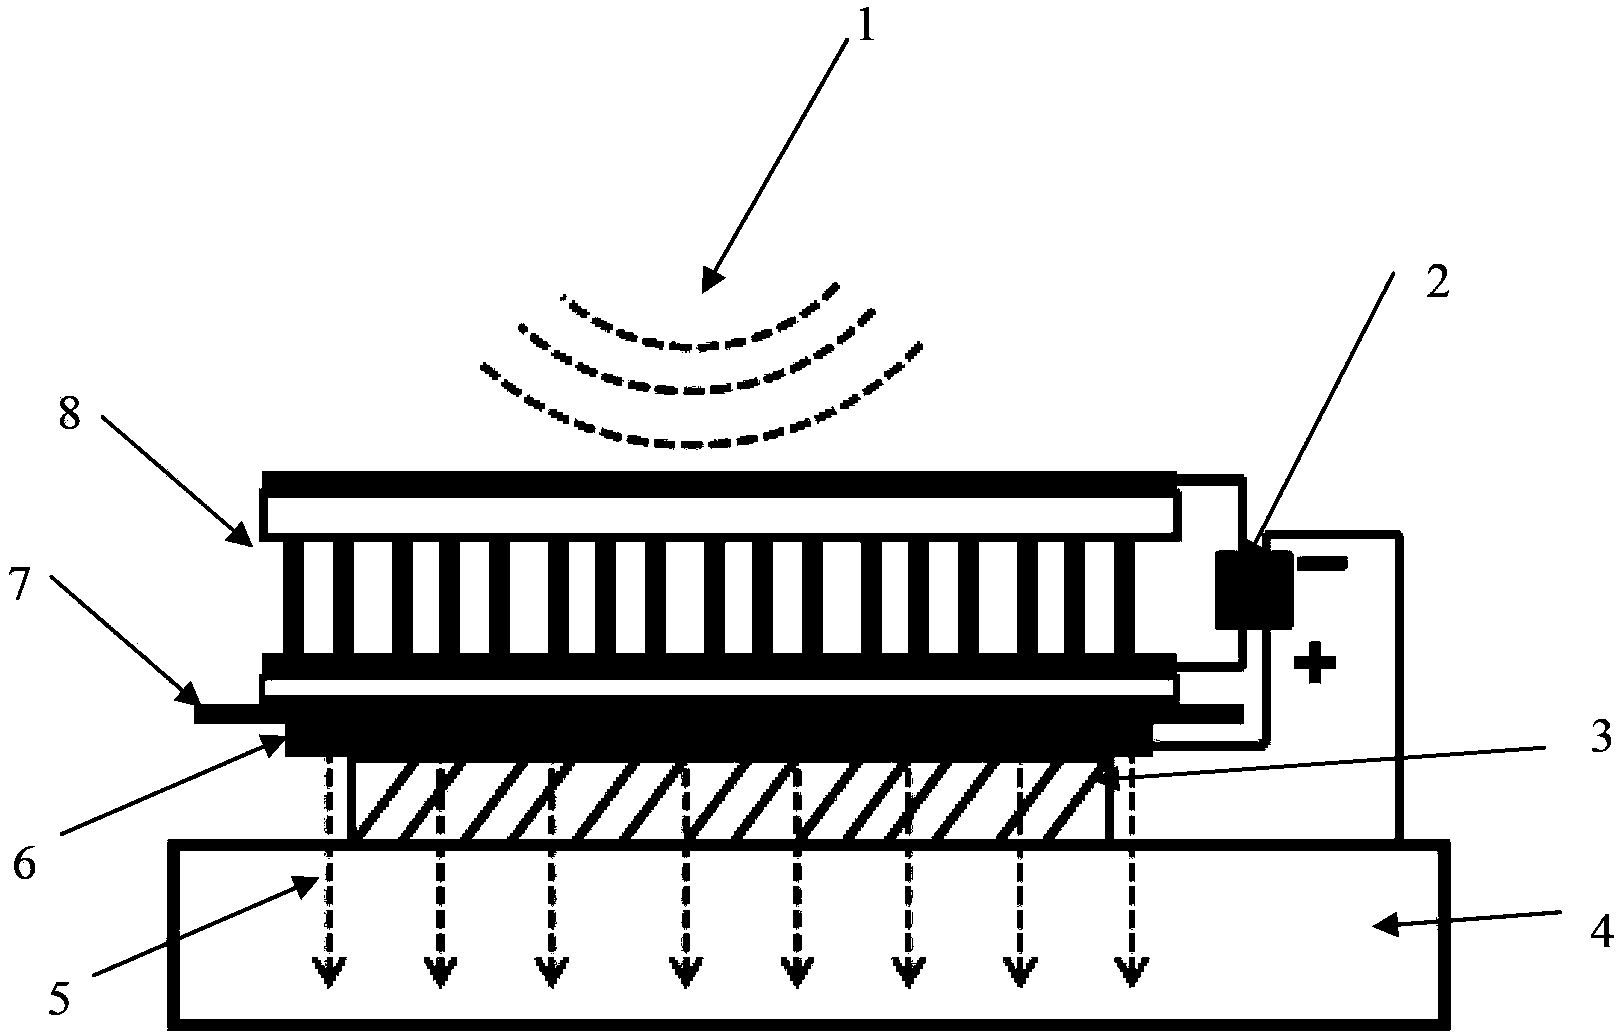 System using piezoelectric field for driving medicine iontophoresis